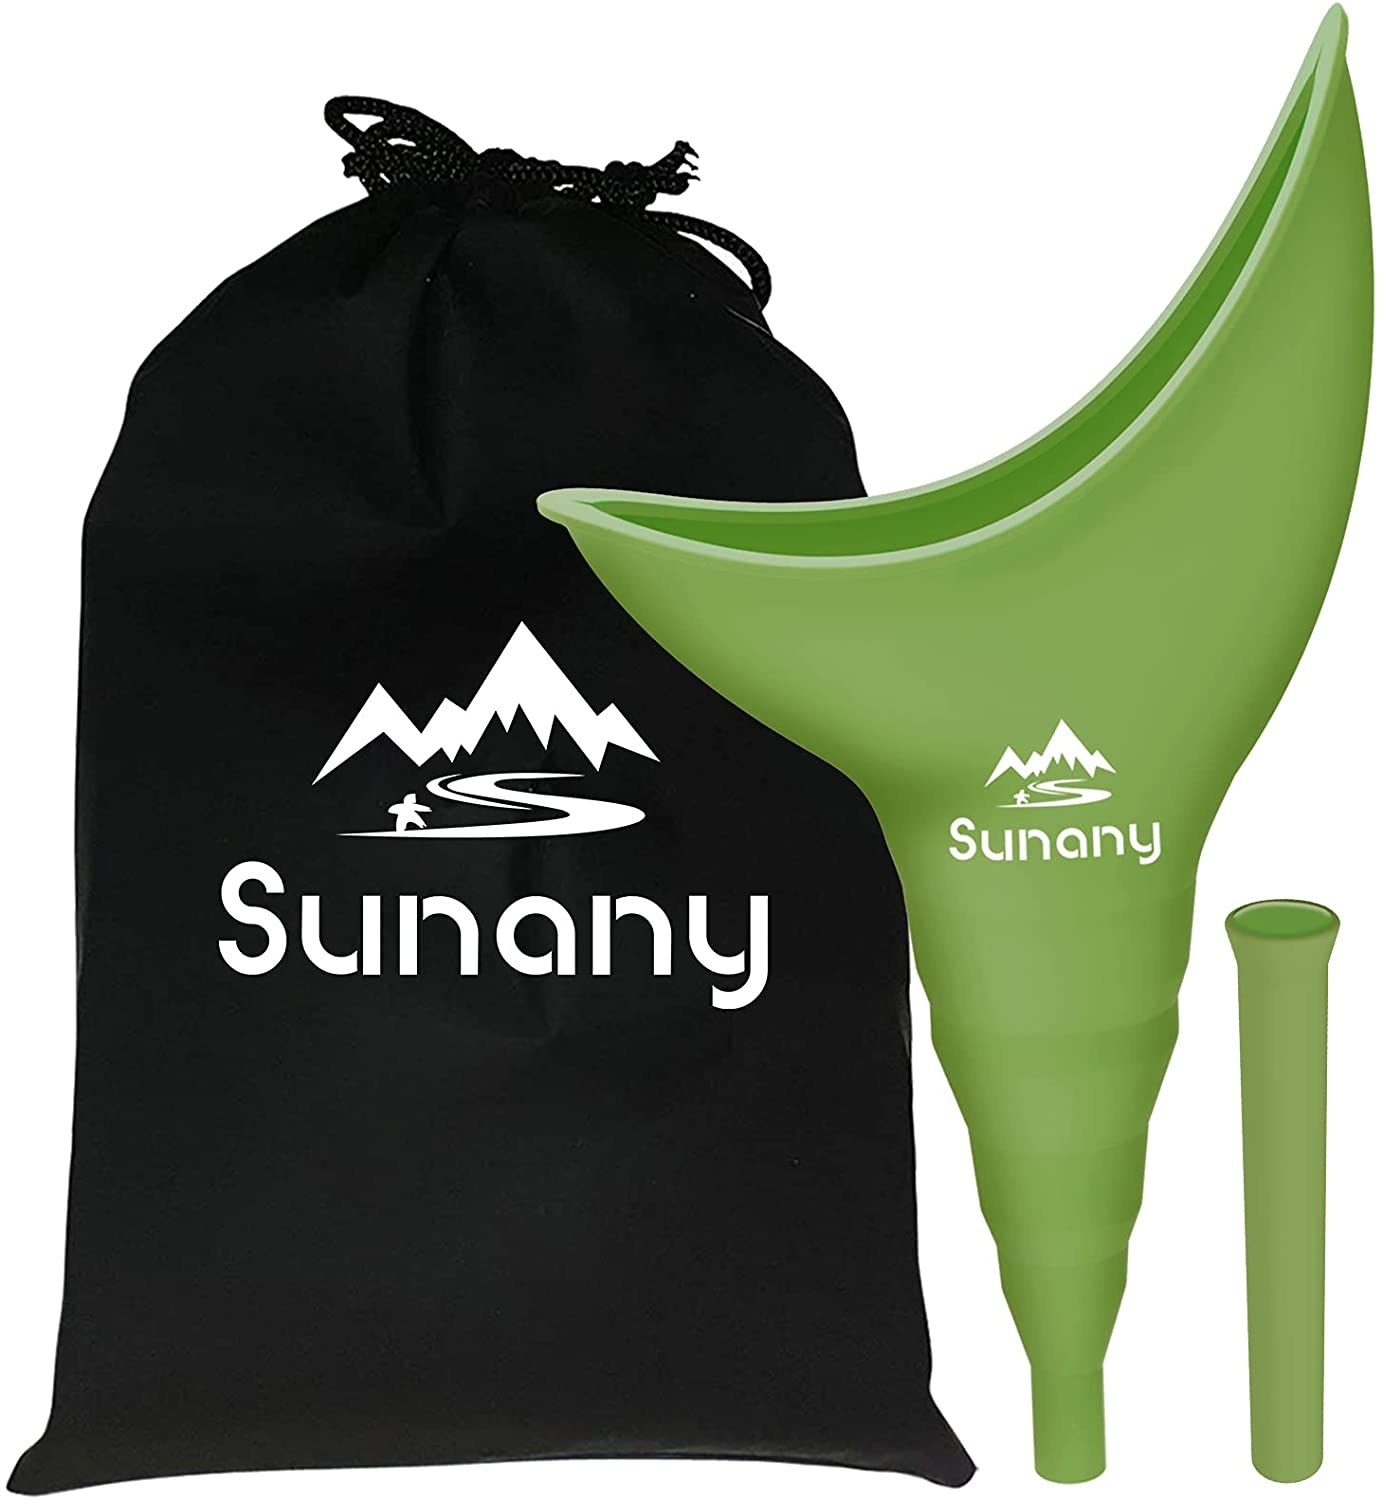 the green urination device and its carrying pouch